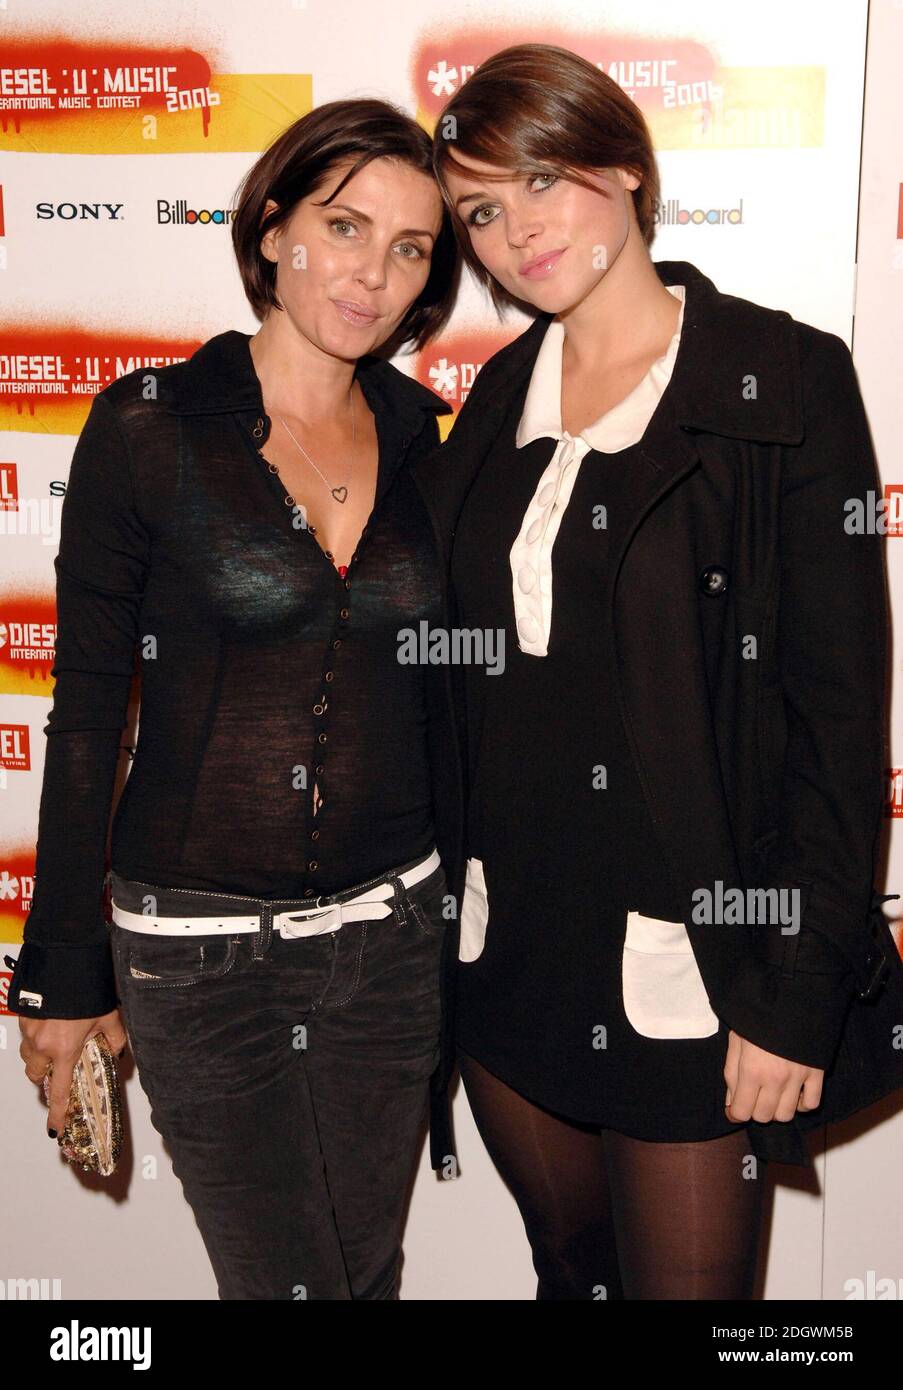 Sadie Frost and Holly Davidson arriving at the Diesel U Music Awards 2006 at the Shoreditch Town Hall in London on October 4, 2006.  Doug Peters/EMPICS Entertainment Stock Photo